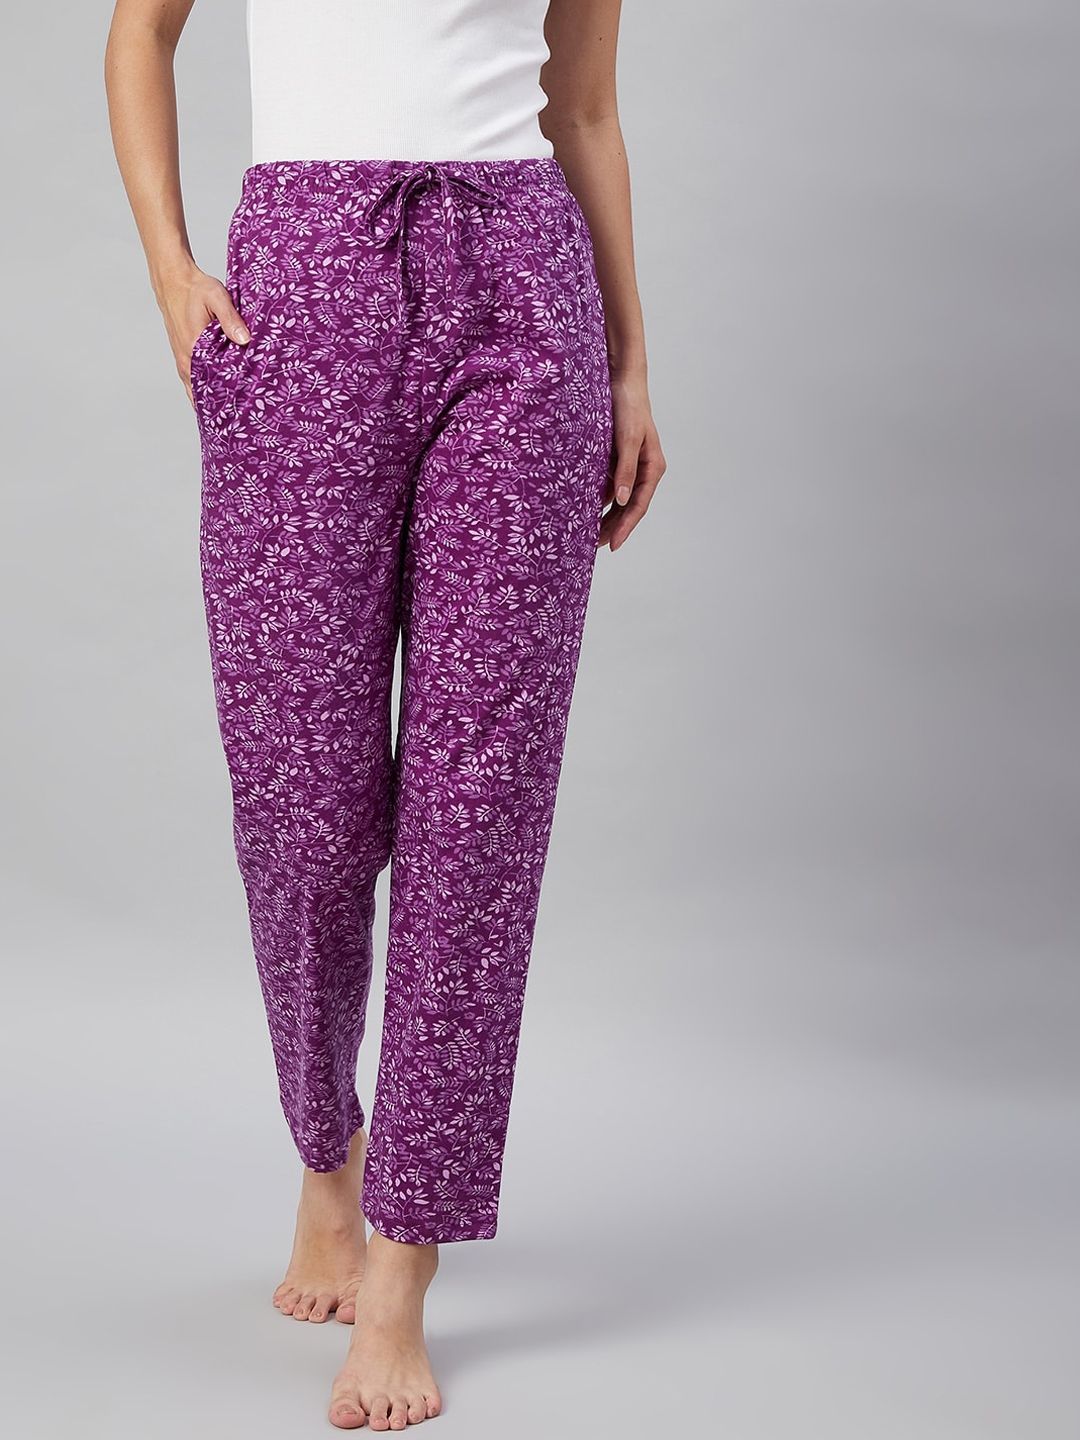 C9 AIRWEAR Women Purple & White Floral Printed Pure Cotton Lounge Pants Price in India